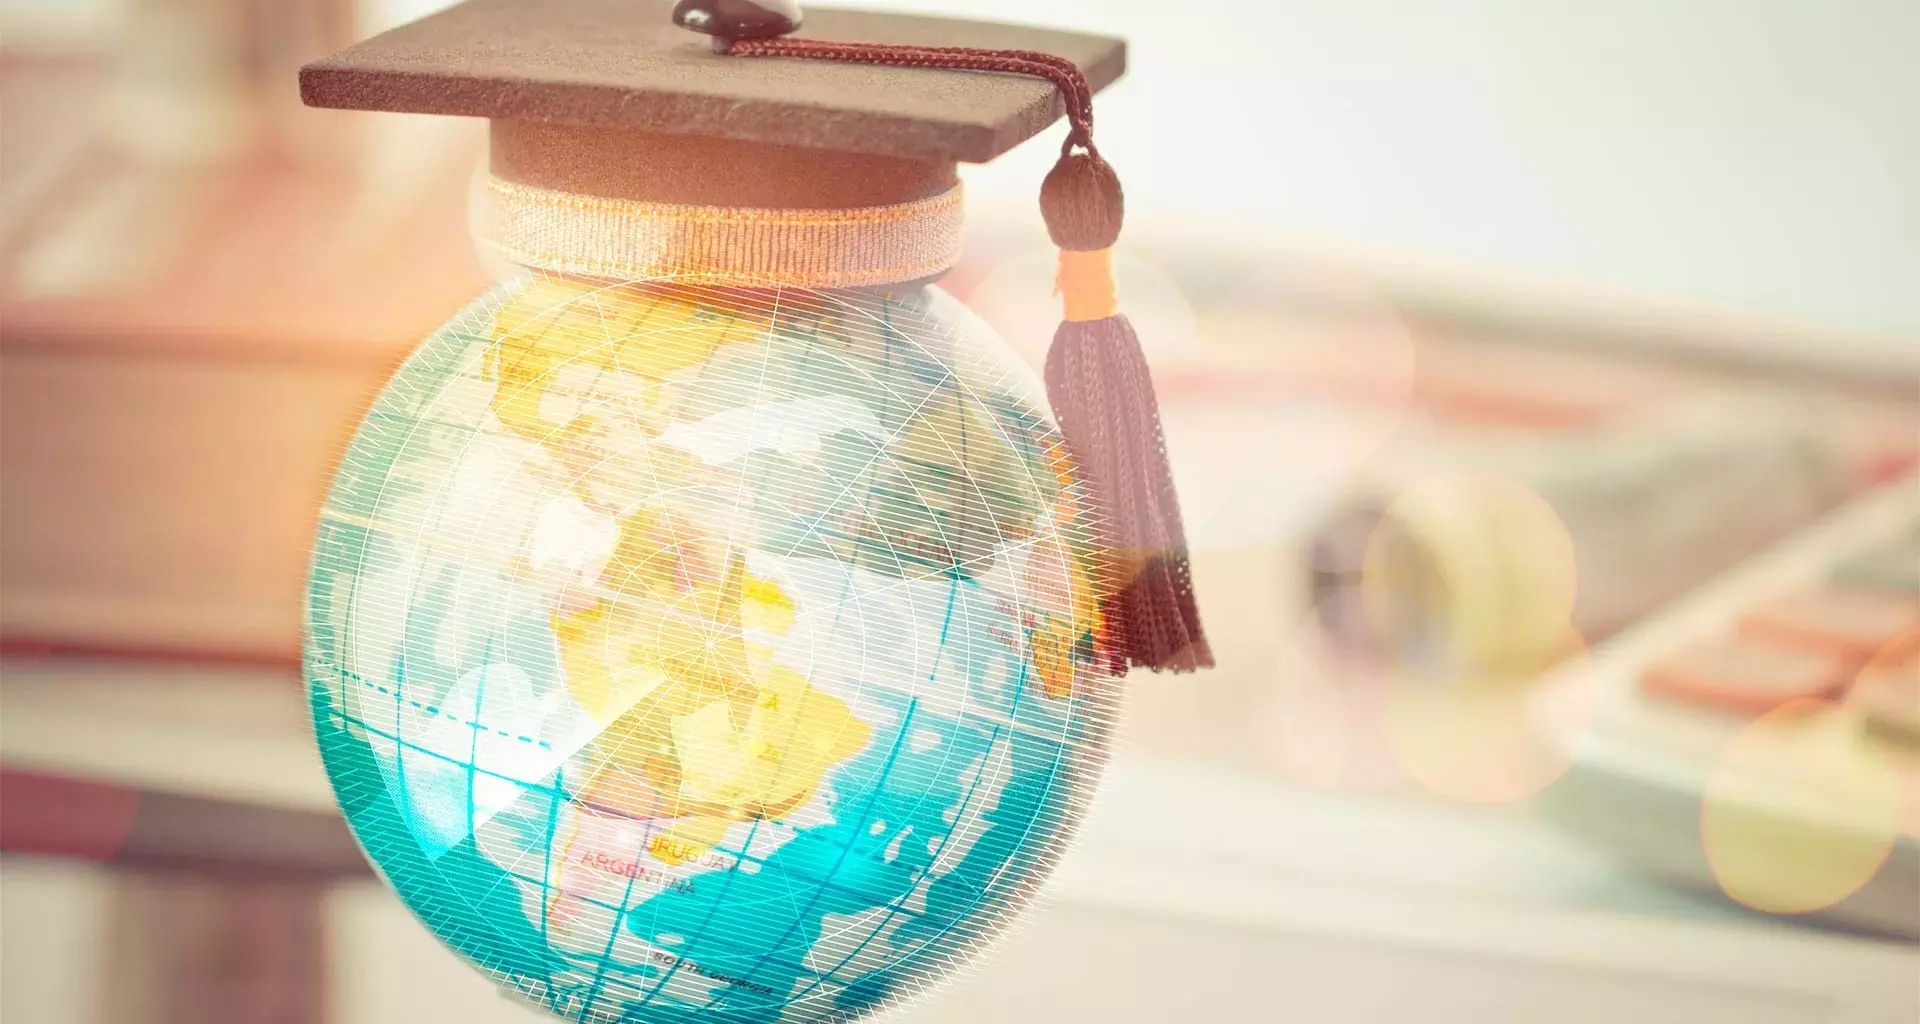 The four key elements for universities to help develop Latin America